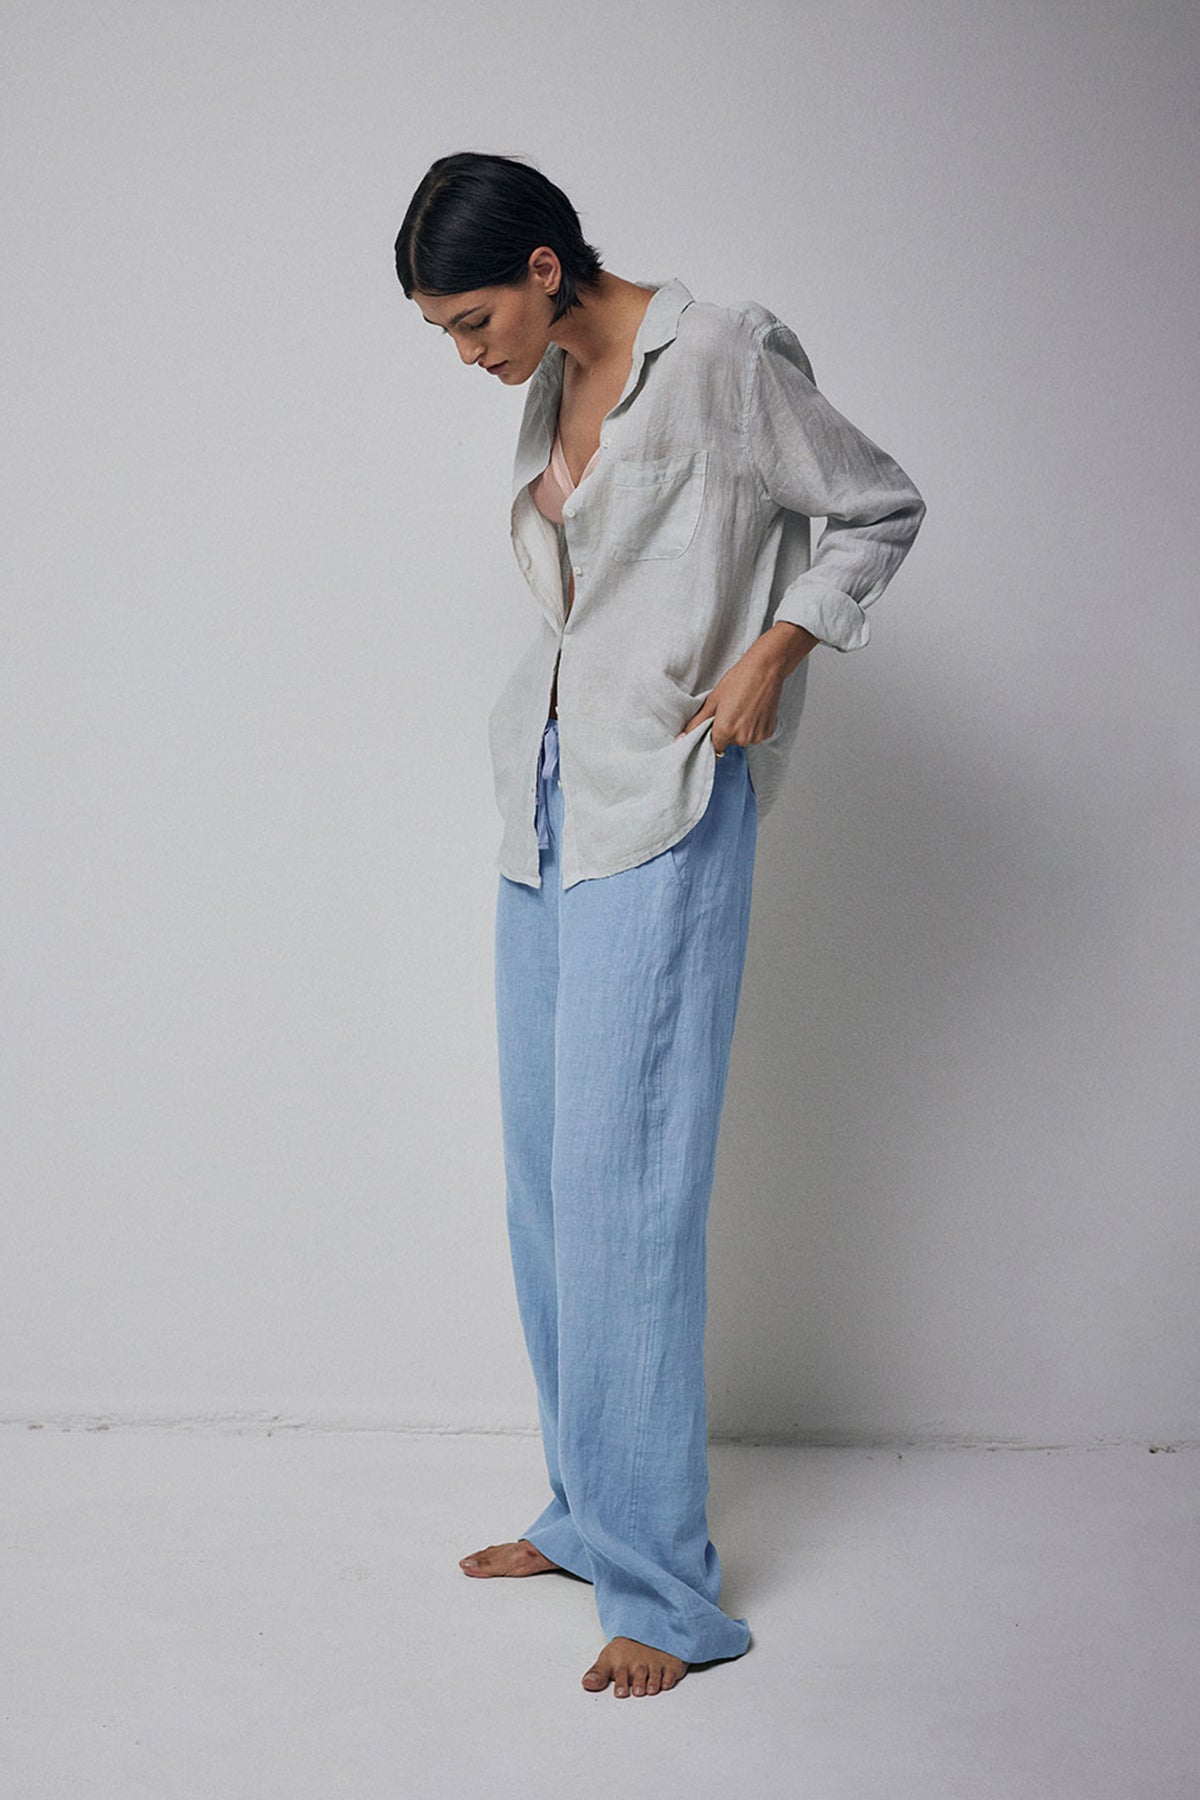 A person standing barefoot in a studio, wearing light blue Velvet by Jenny Graham Pico Pants and a loosely fitted grey shirt.-36212496859329